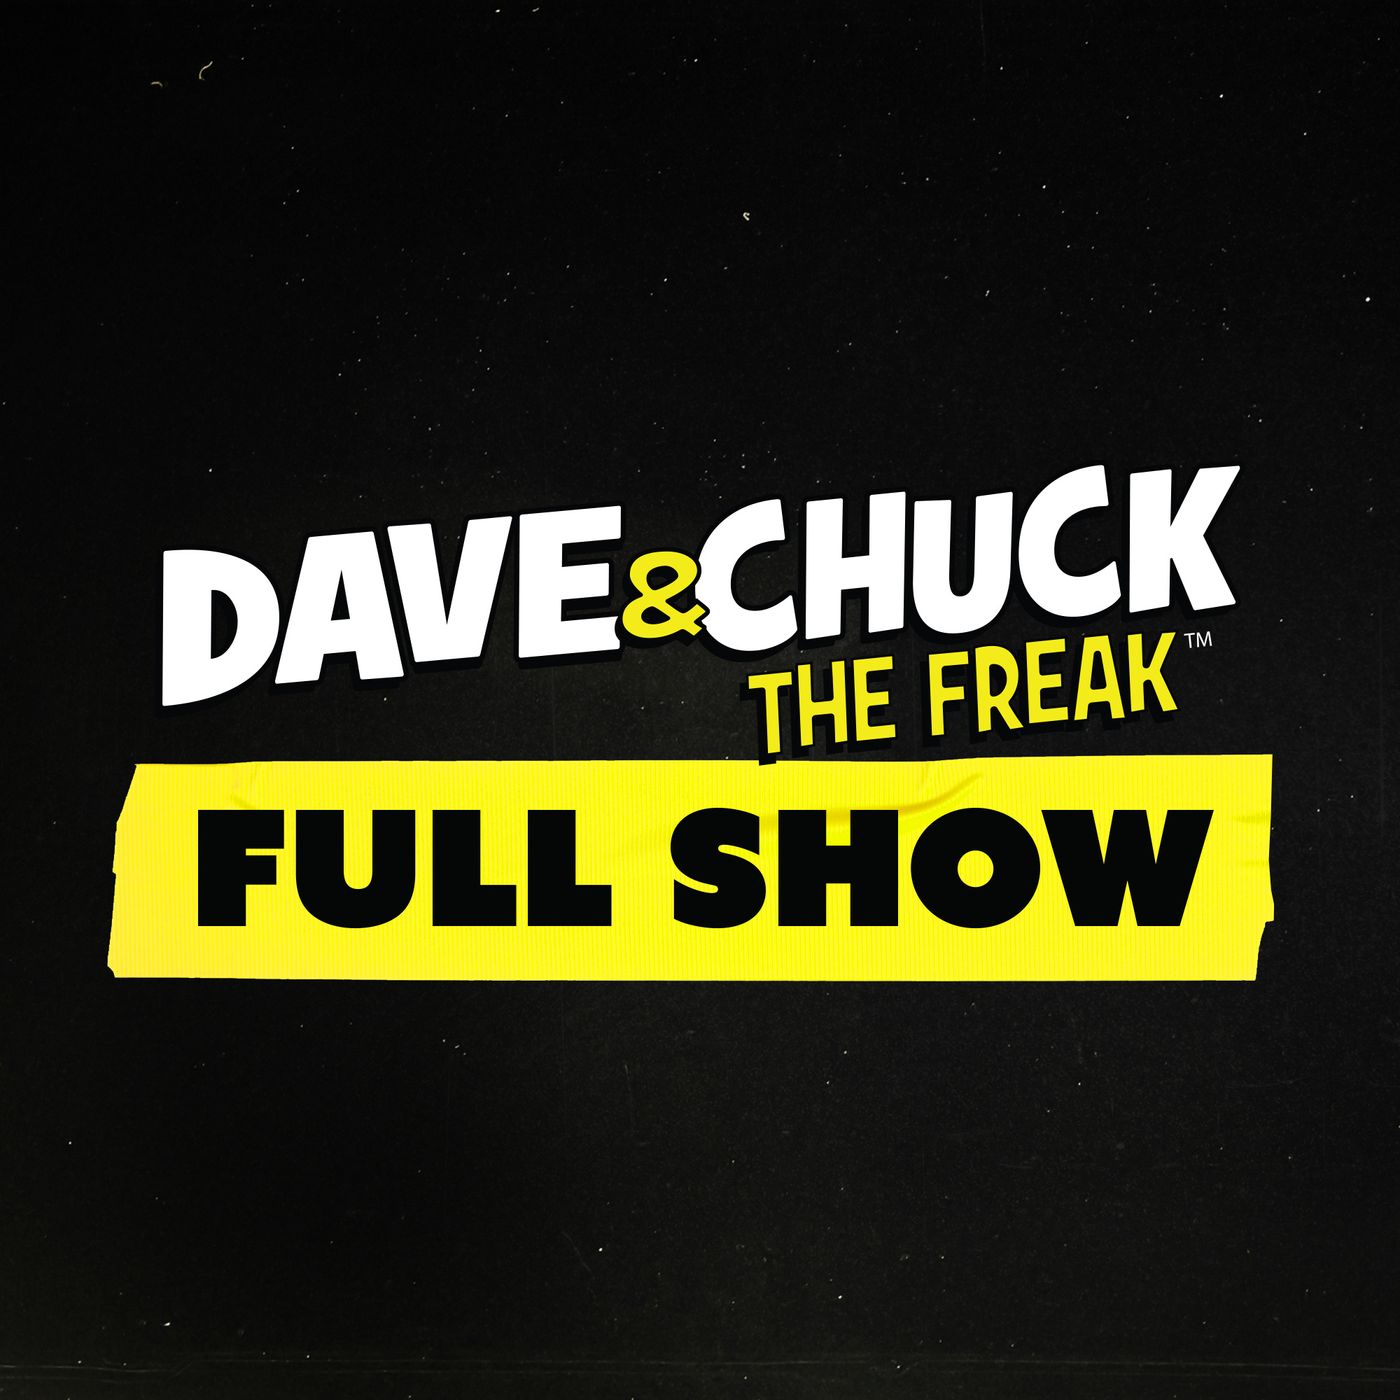 Friday, June 2nd 2023 Dave & Chuck the Freak Full Show